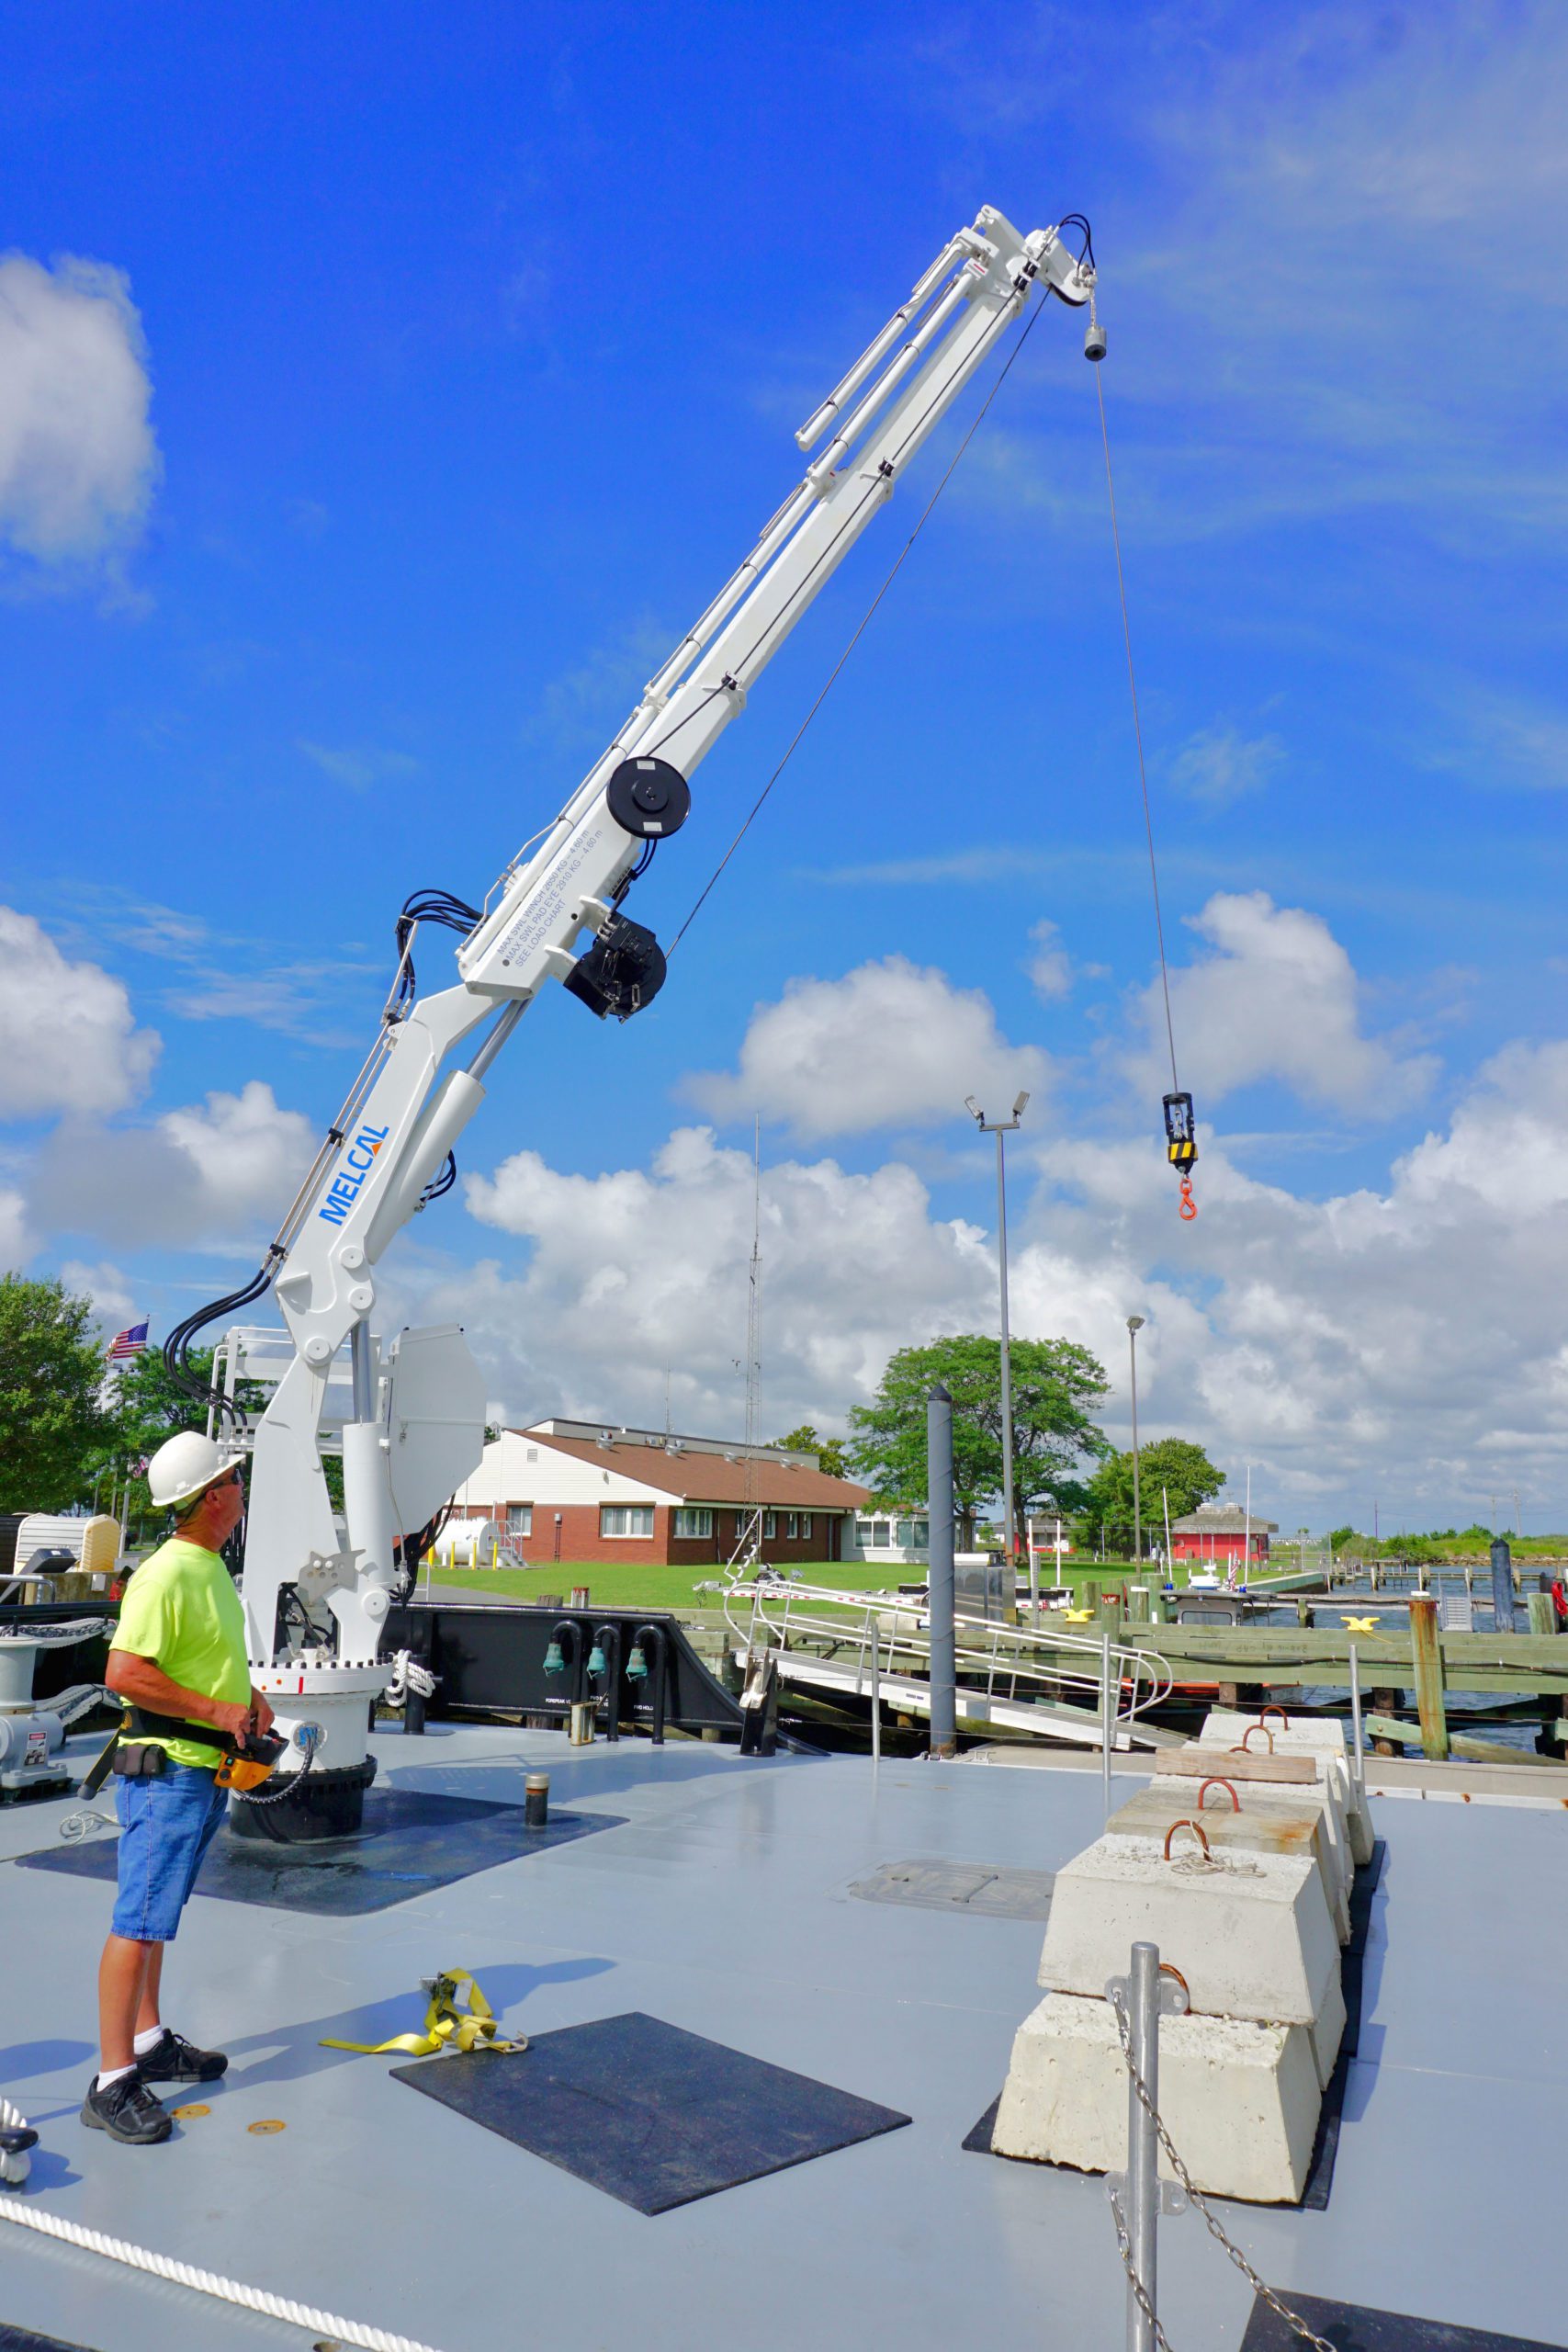 Engineer Edward Long demonstrates the Melcal crane installed on the bow, which has a 40-foot reach at full extension. The row of 900-pound cement blocks on deck are used to anchor buoys in position.